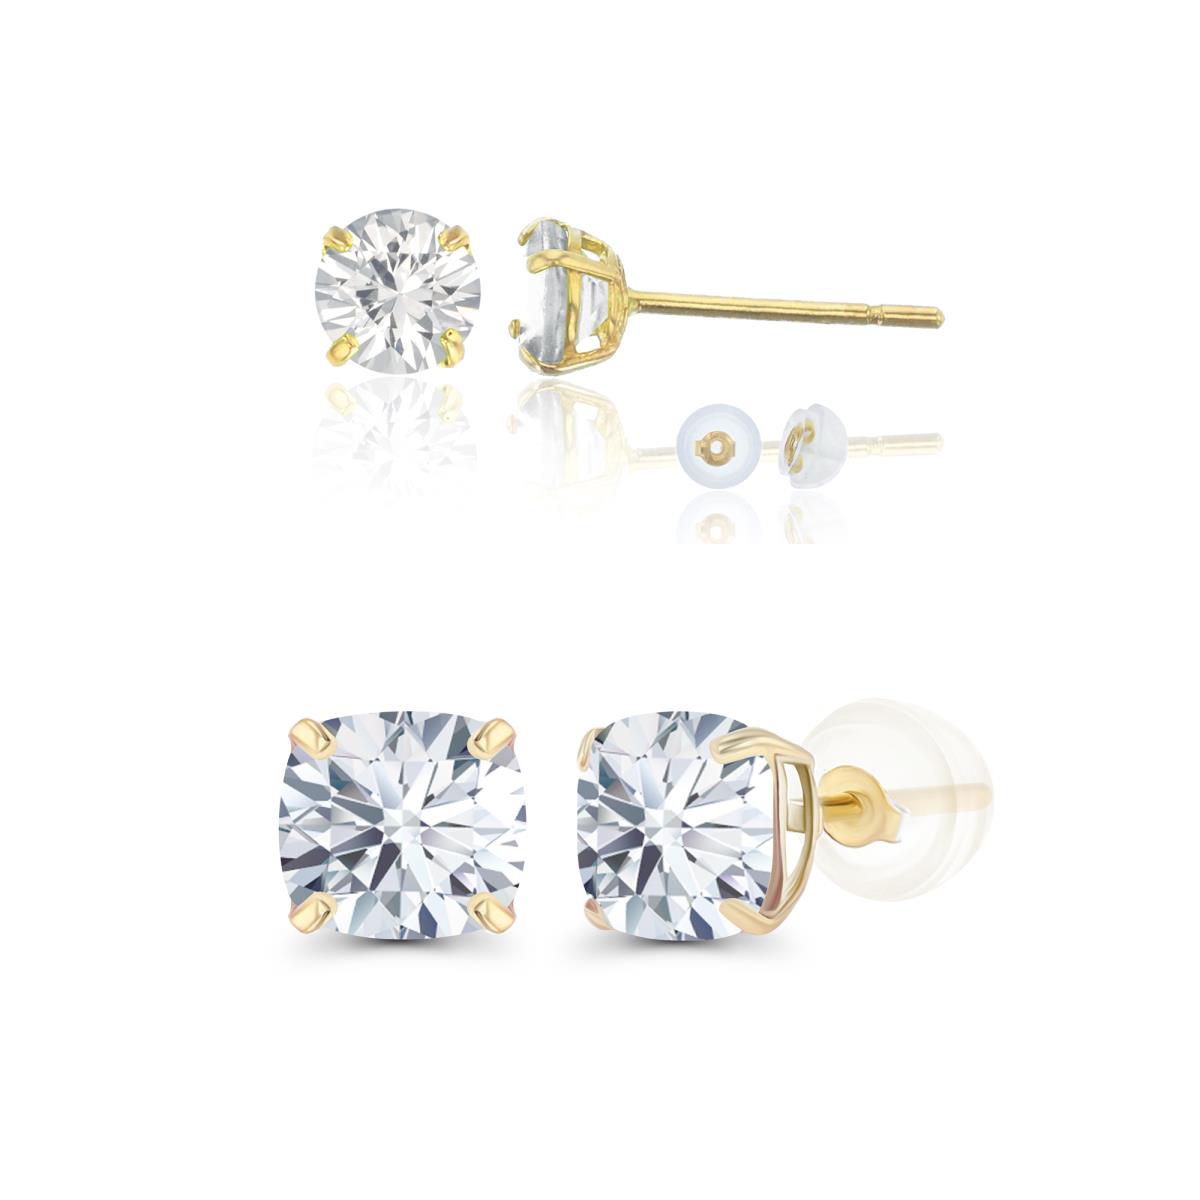 14K Yellow Gold 4mm Round & 5mm Cushion Created White Sapphire Earring Set